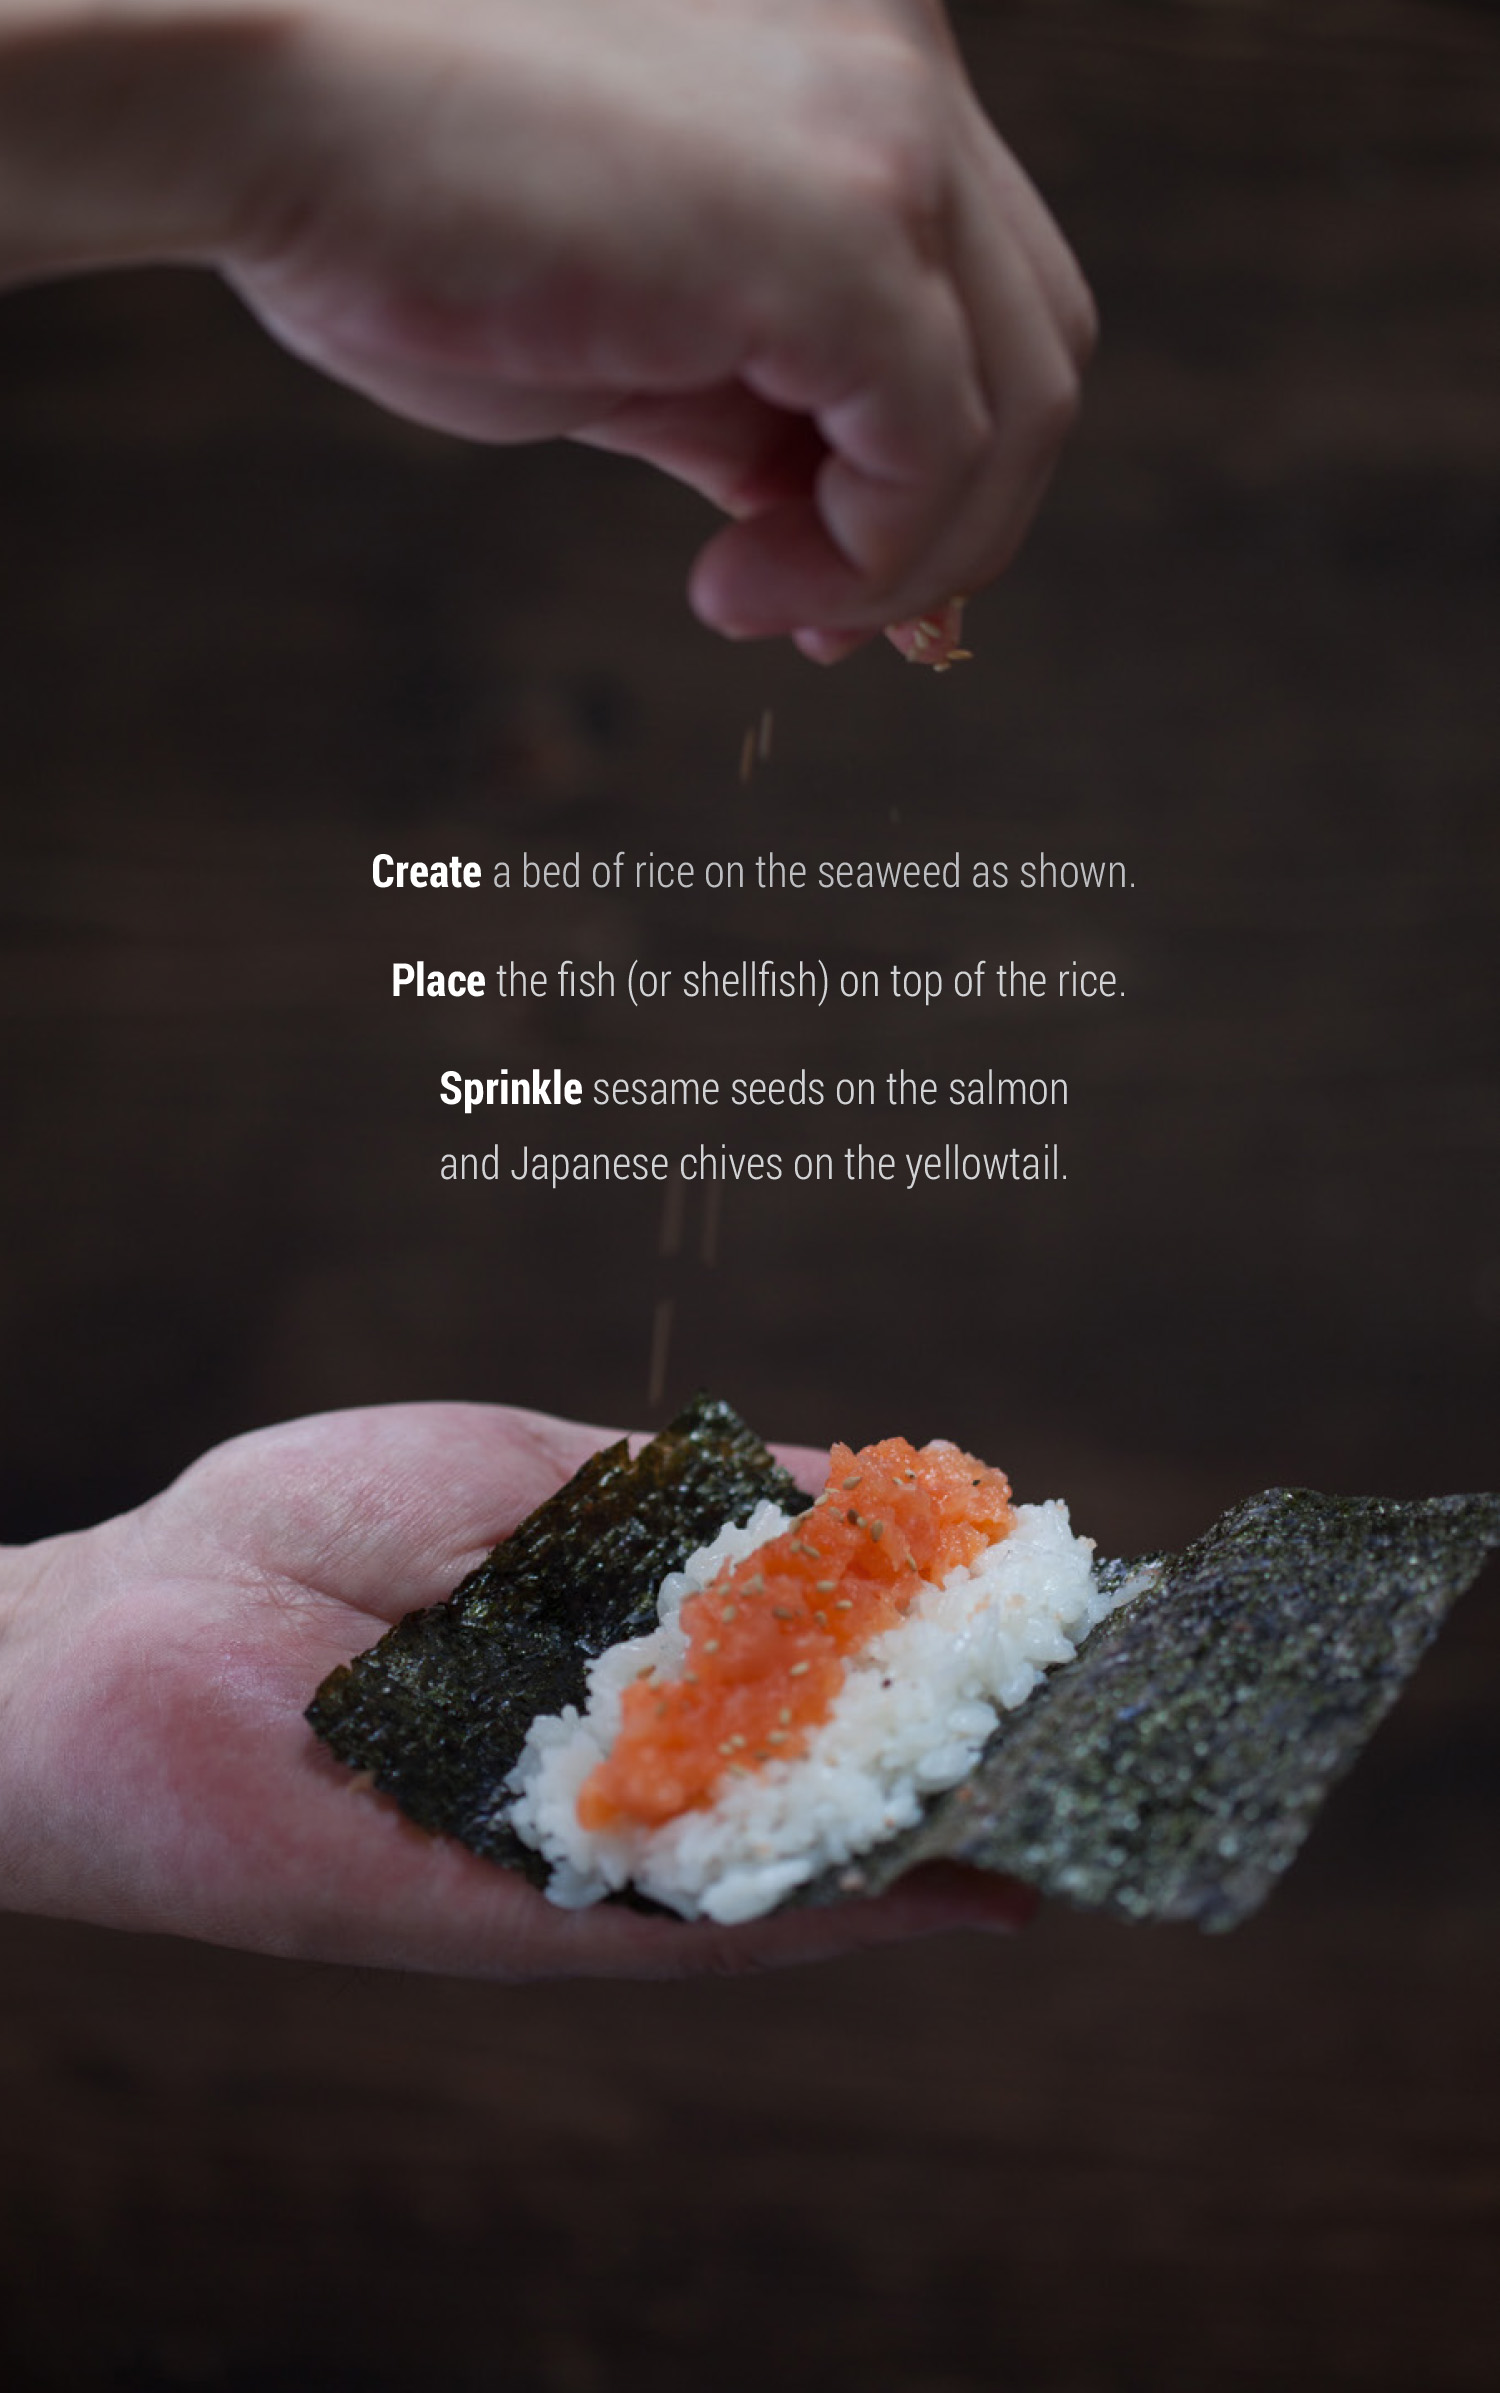 Photo of hand preparing handroll: 1. Create bed of rice on seaweed; 2. Place fish on top of rice; 3. Sprinkle sesame seeds on salmon and chives on yellowtail.